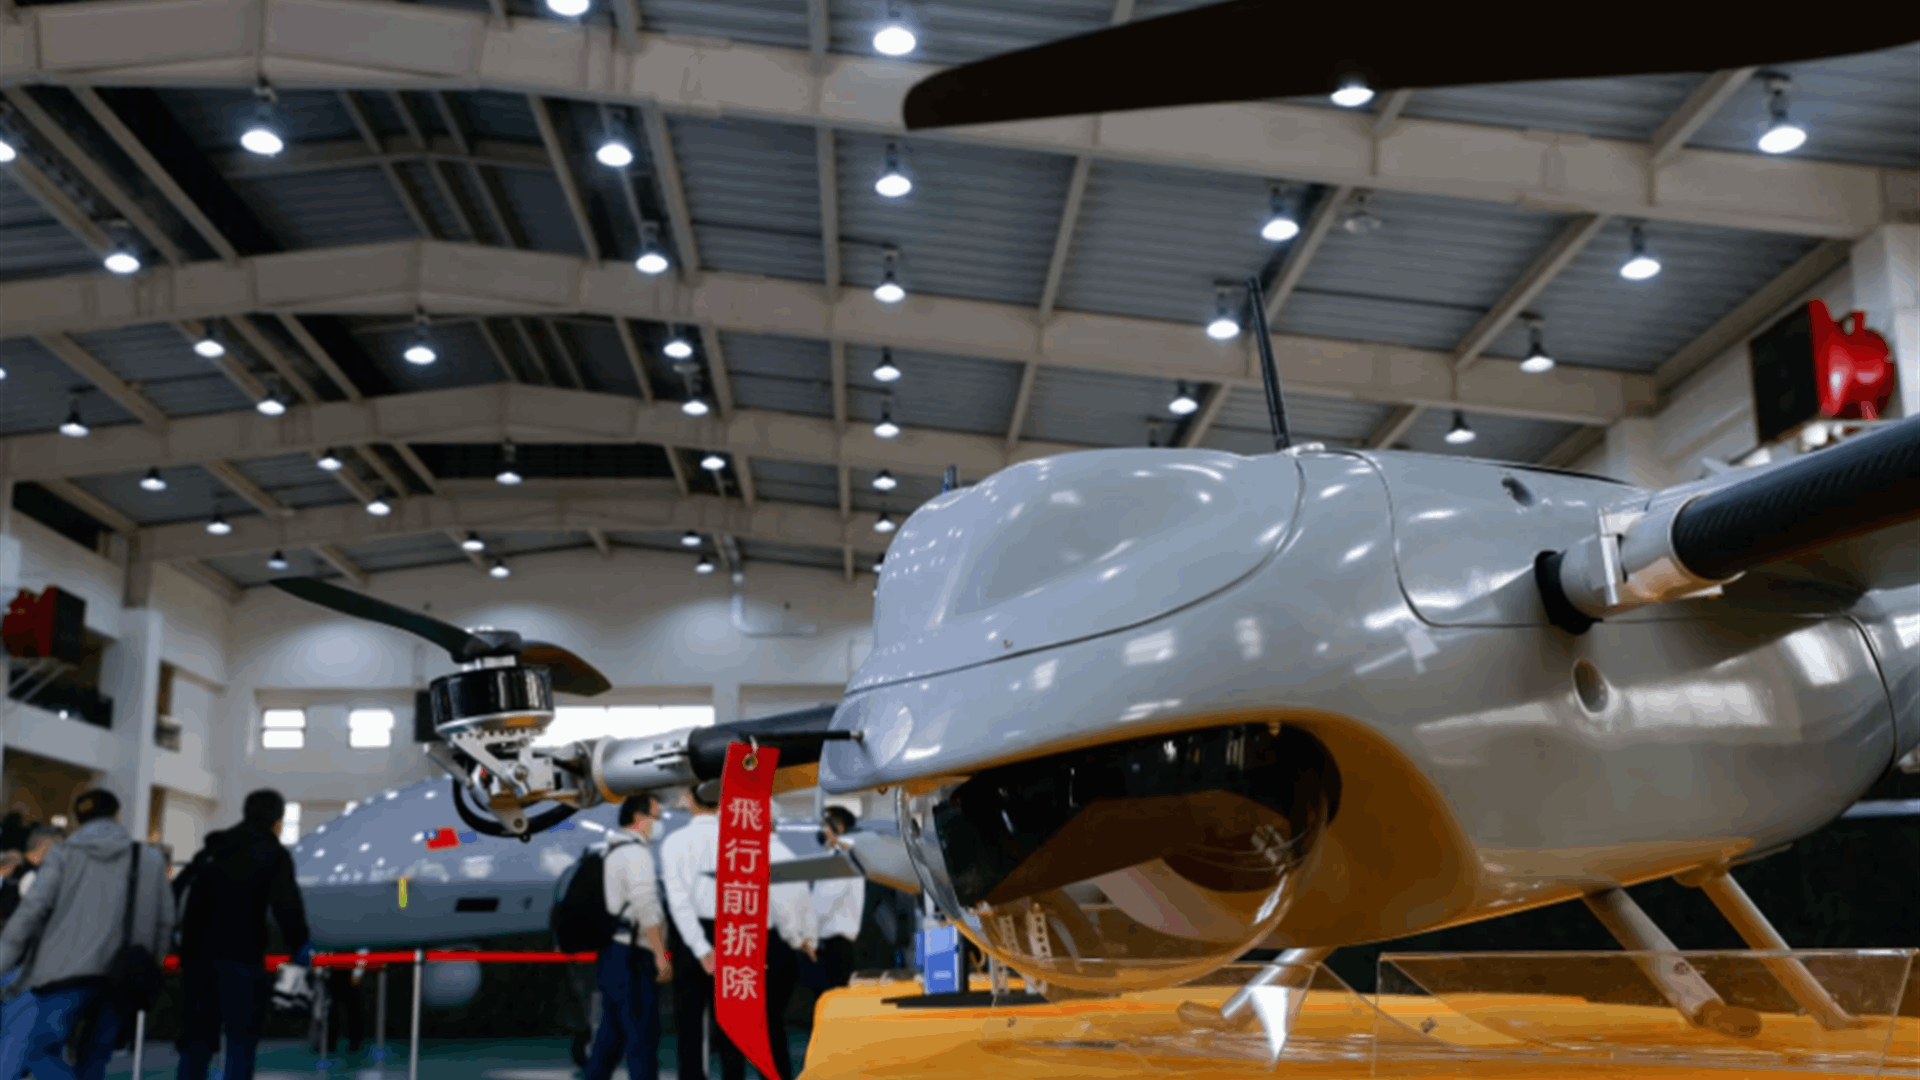 Learning from Ukraine, Taiwan shows off its drones as key to &#39;asymmetric warfare&#39;